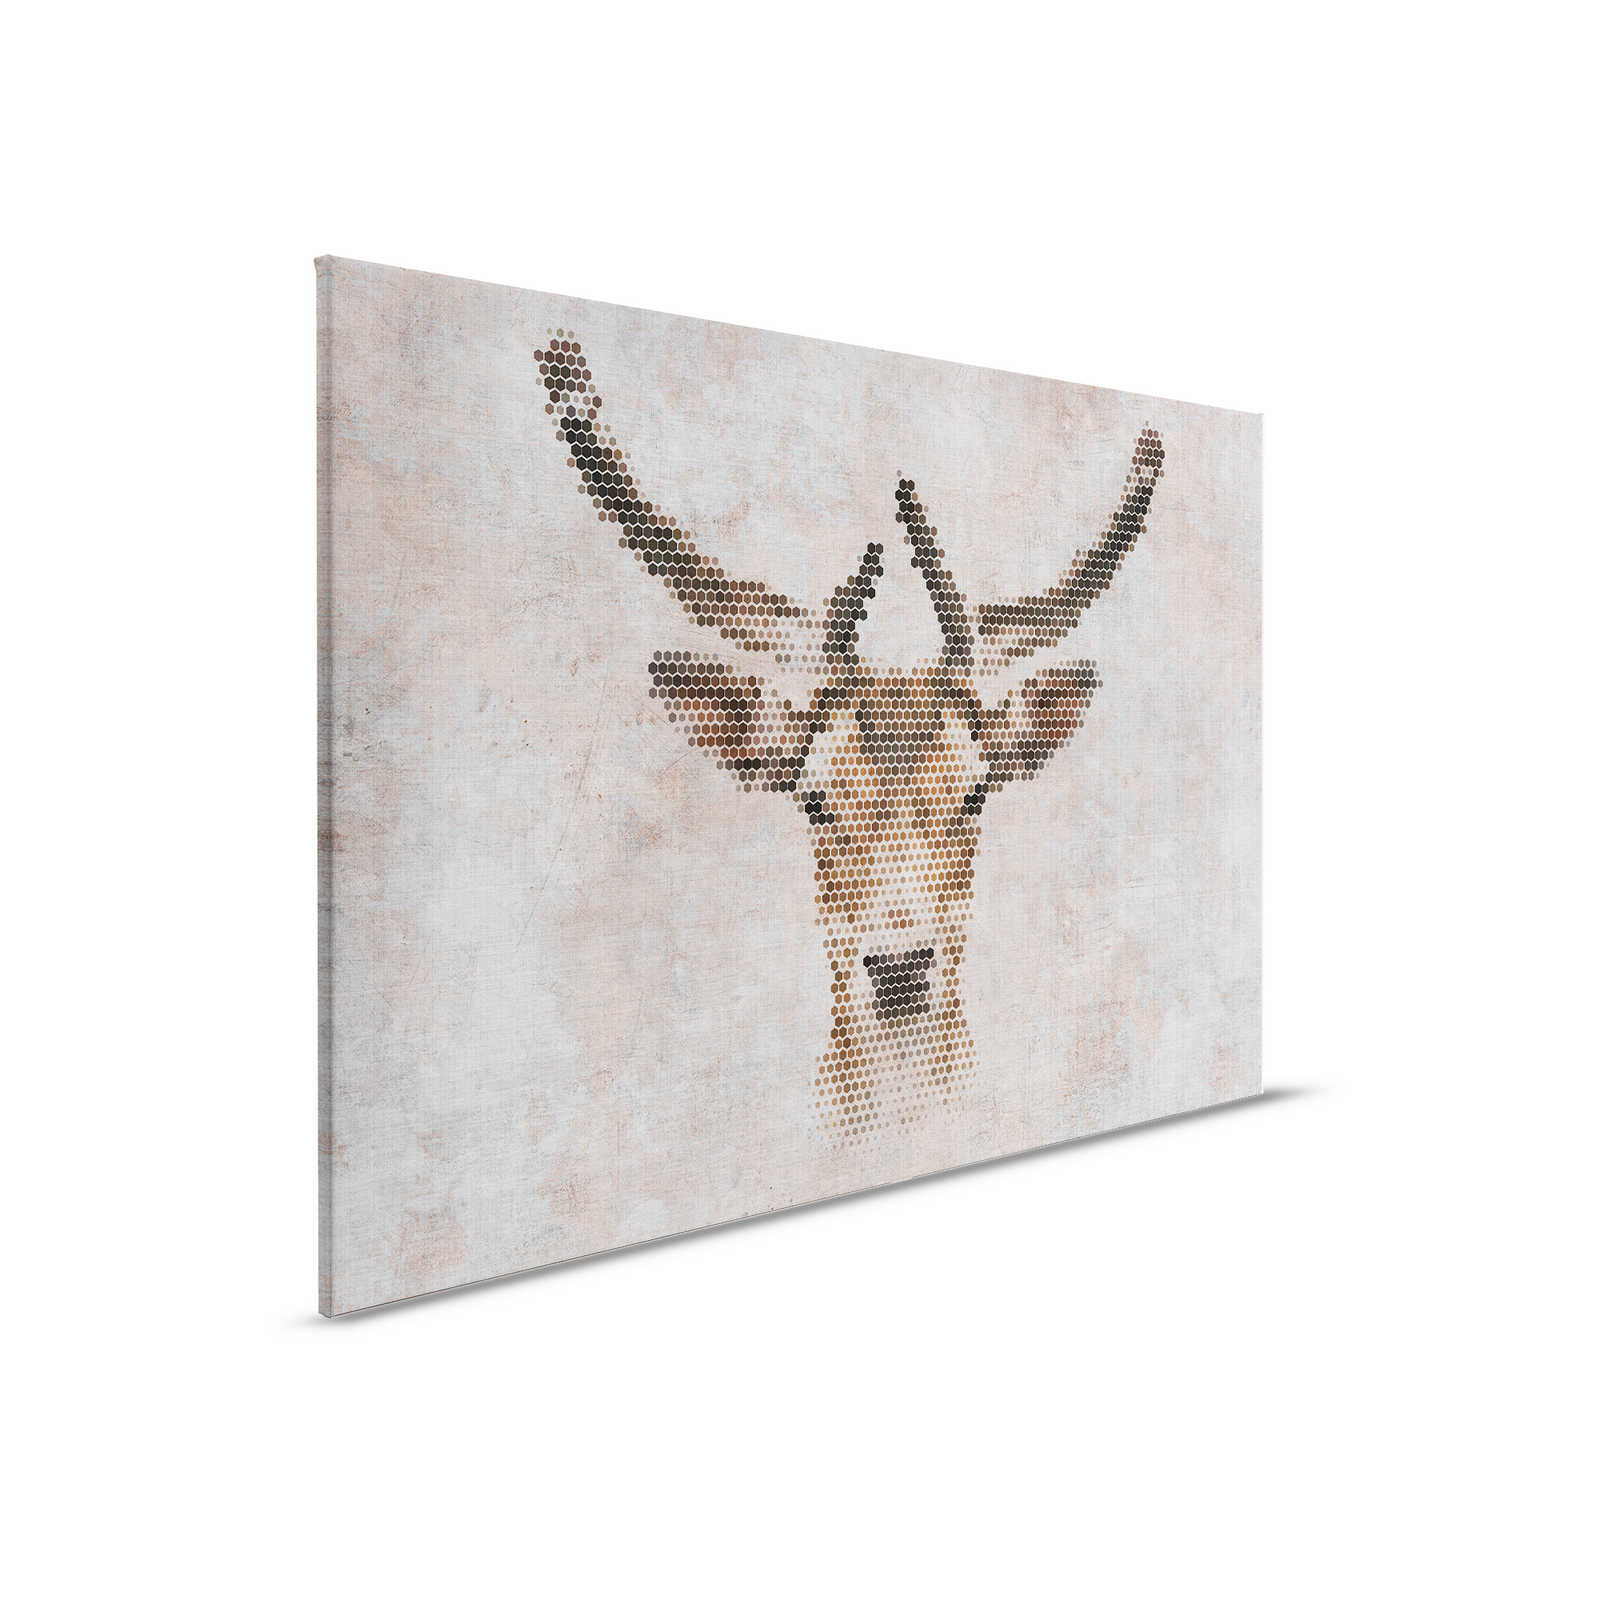         Big three 3 - Canvas painting, concrete look with deer in natural linen structure - 0.90 m x 0.60 m
    